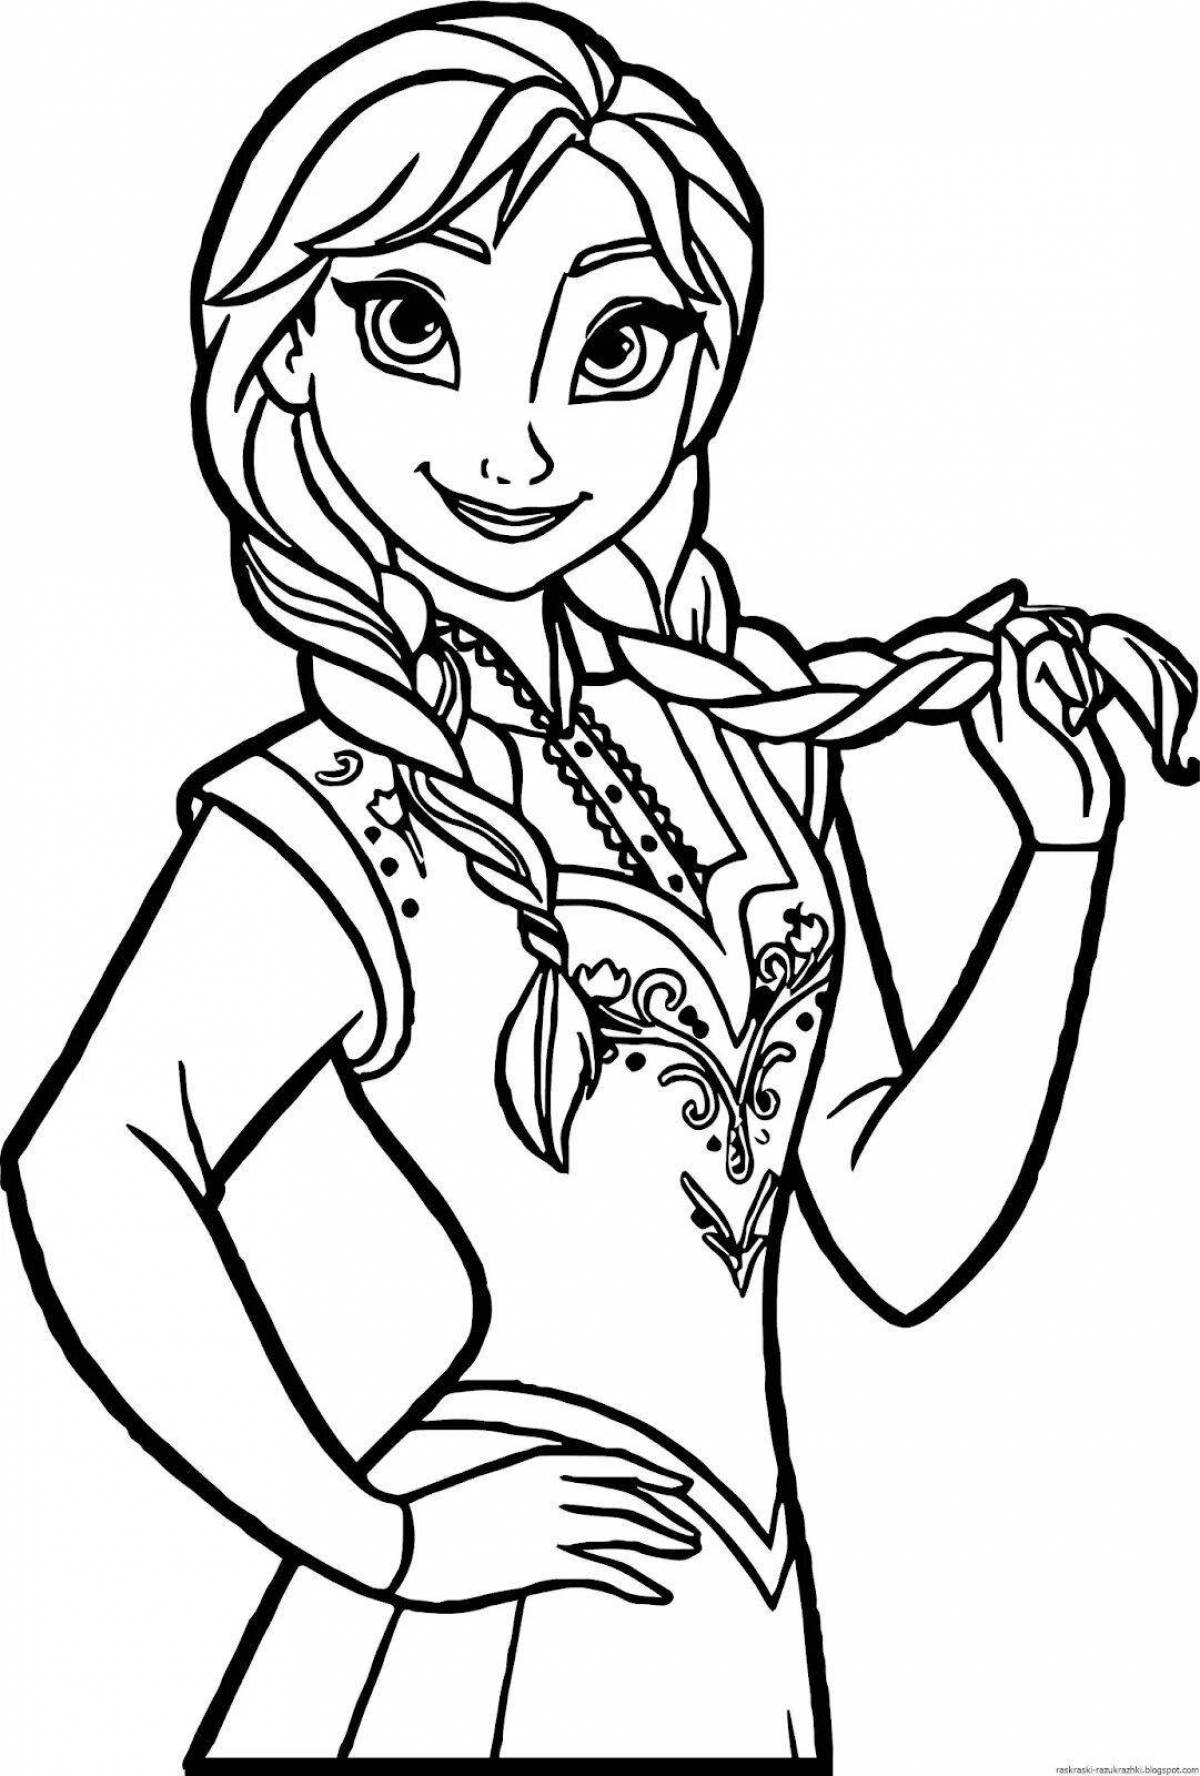 Anna holiday coloring book for kids